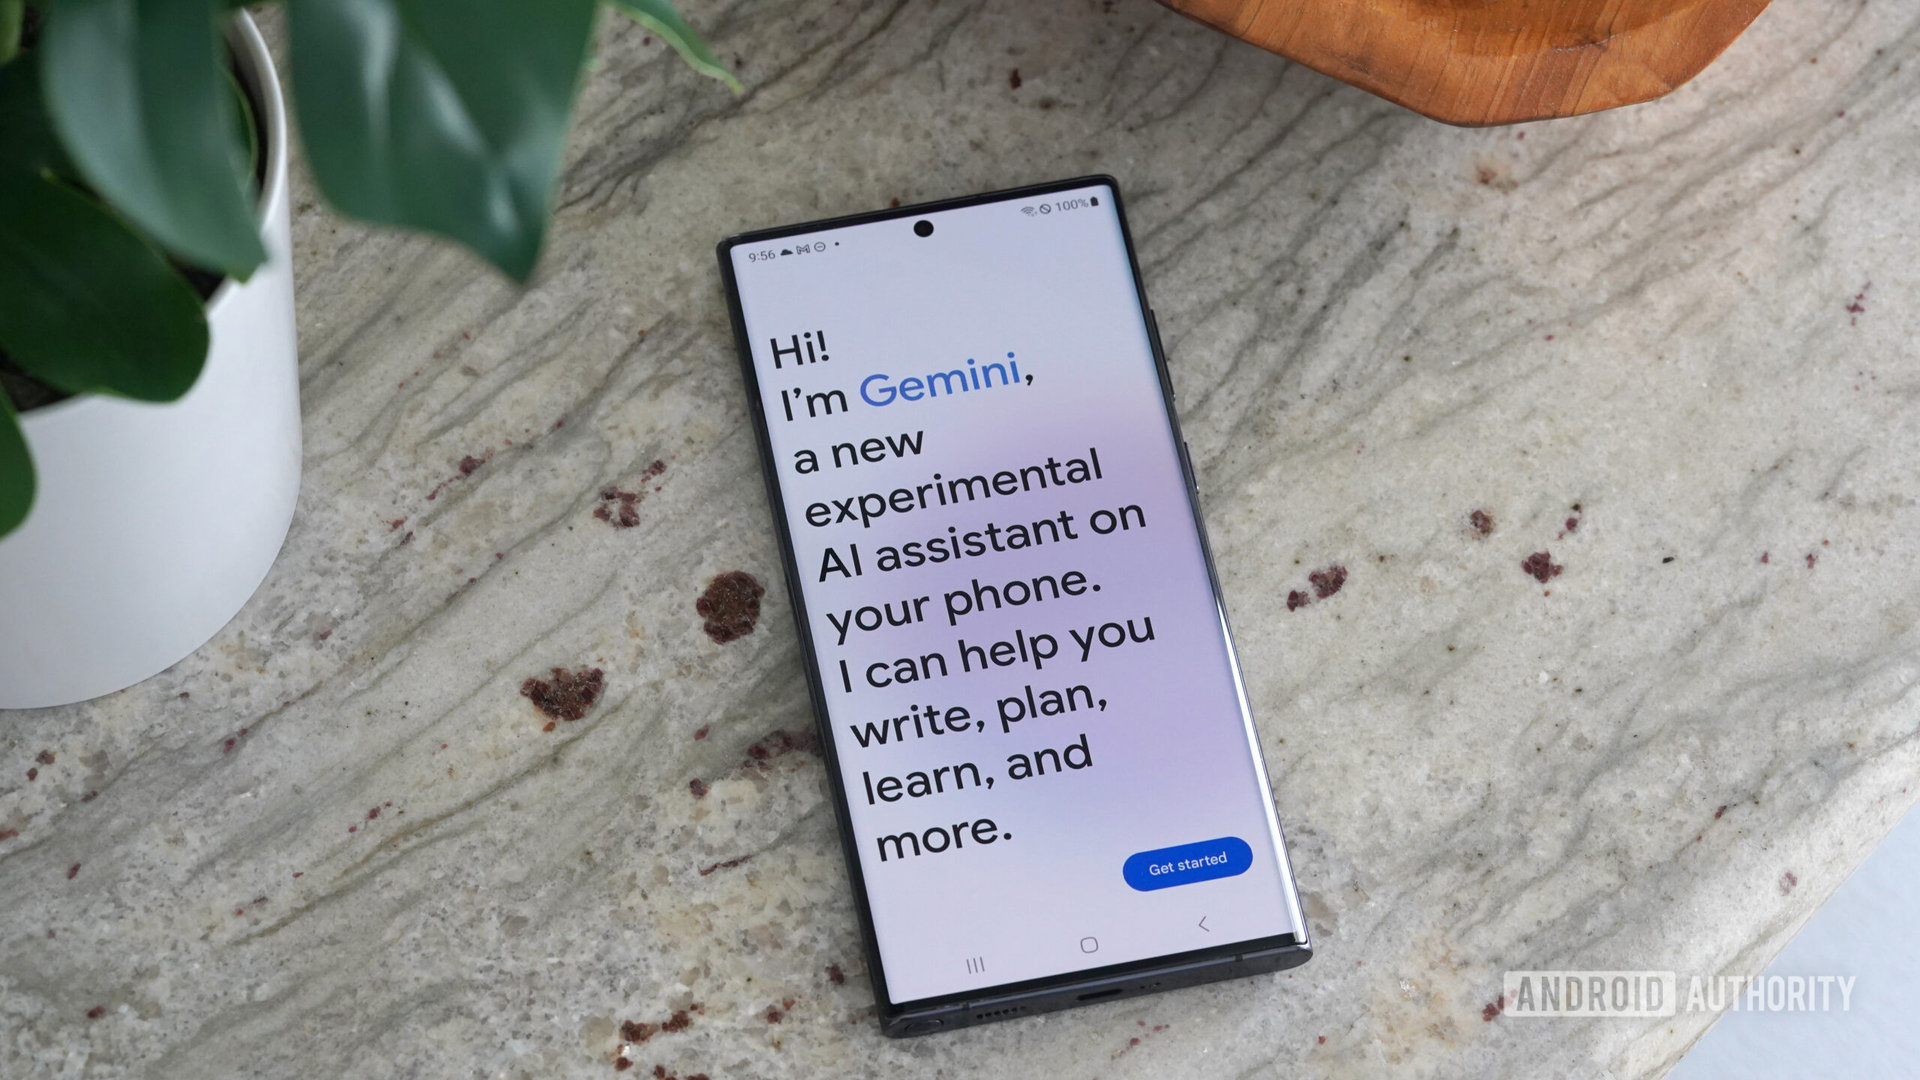 The Gemini Android app is already available in more regions, including Europe and Asia